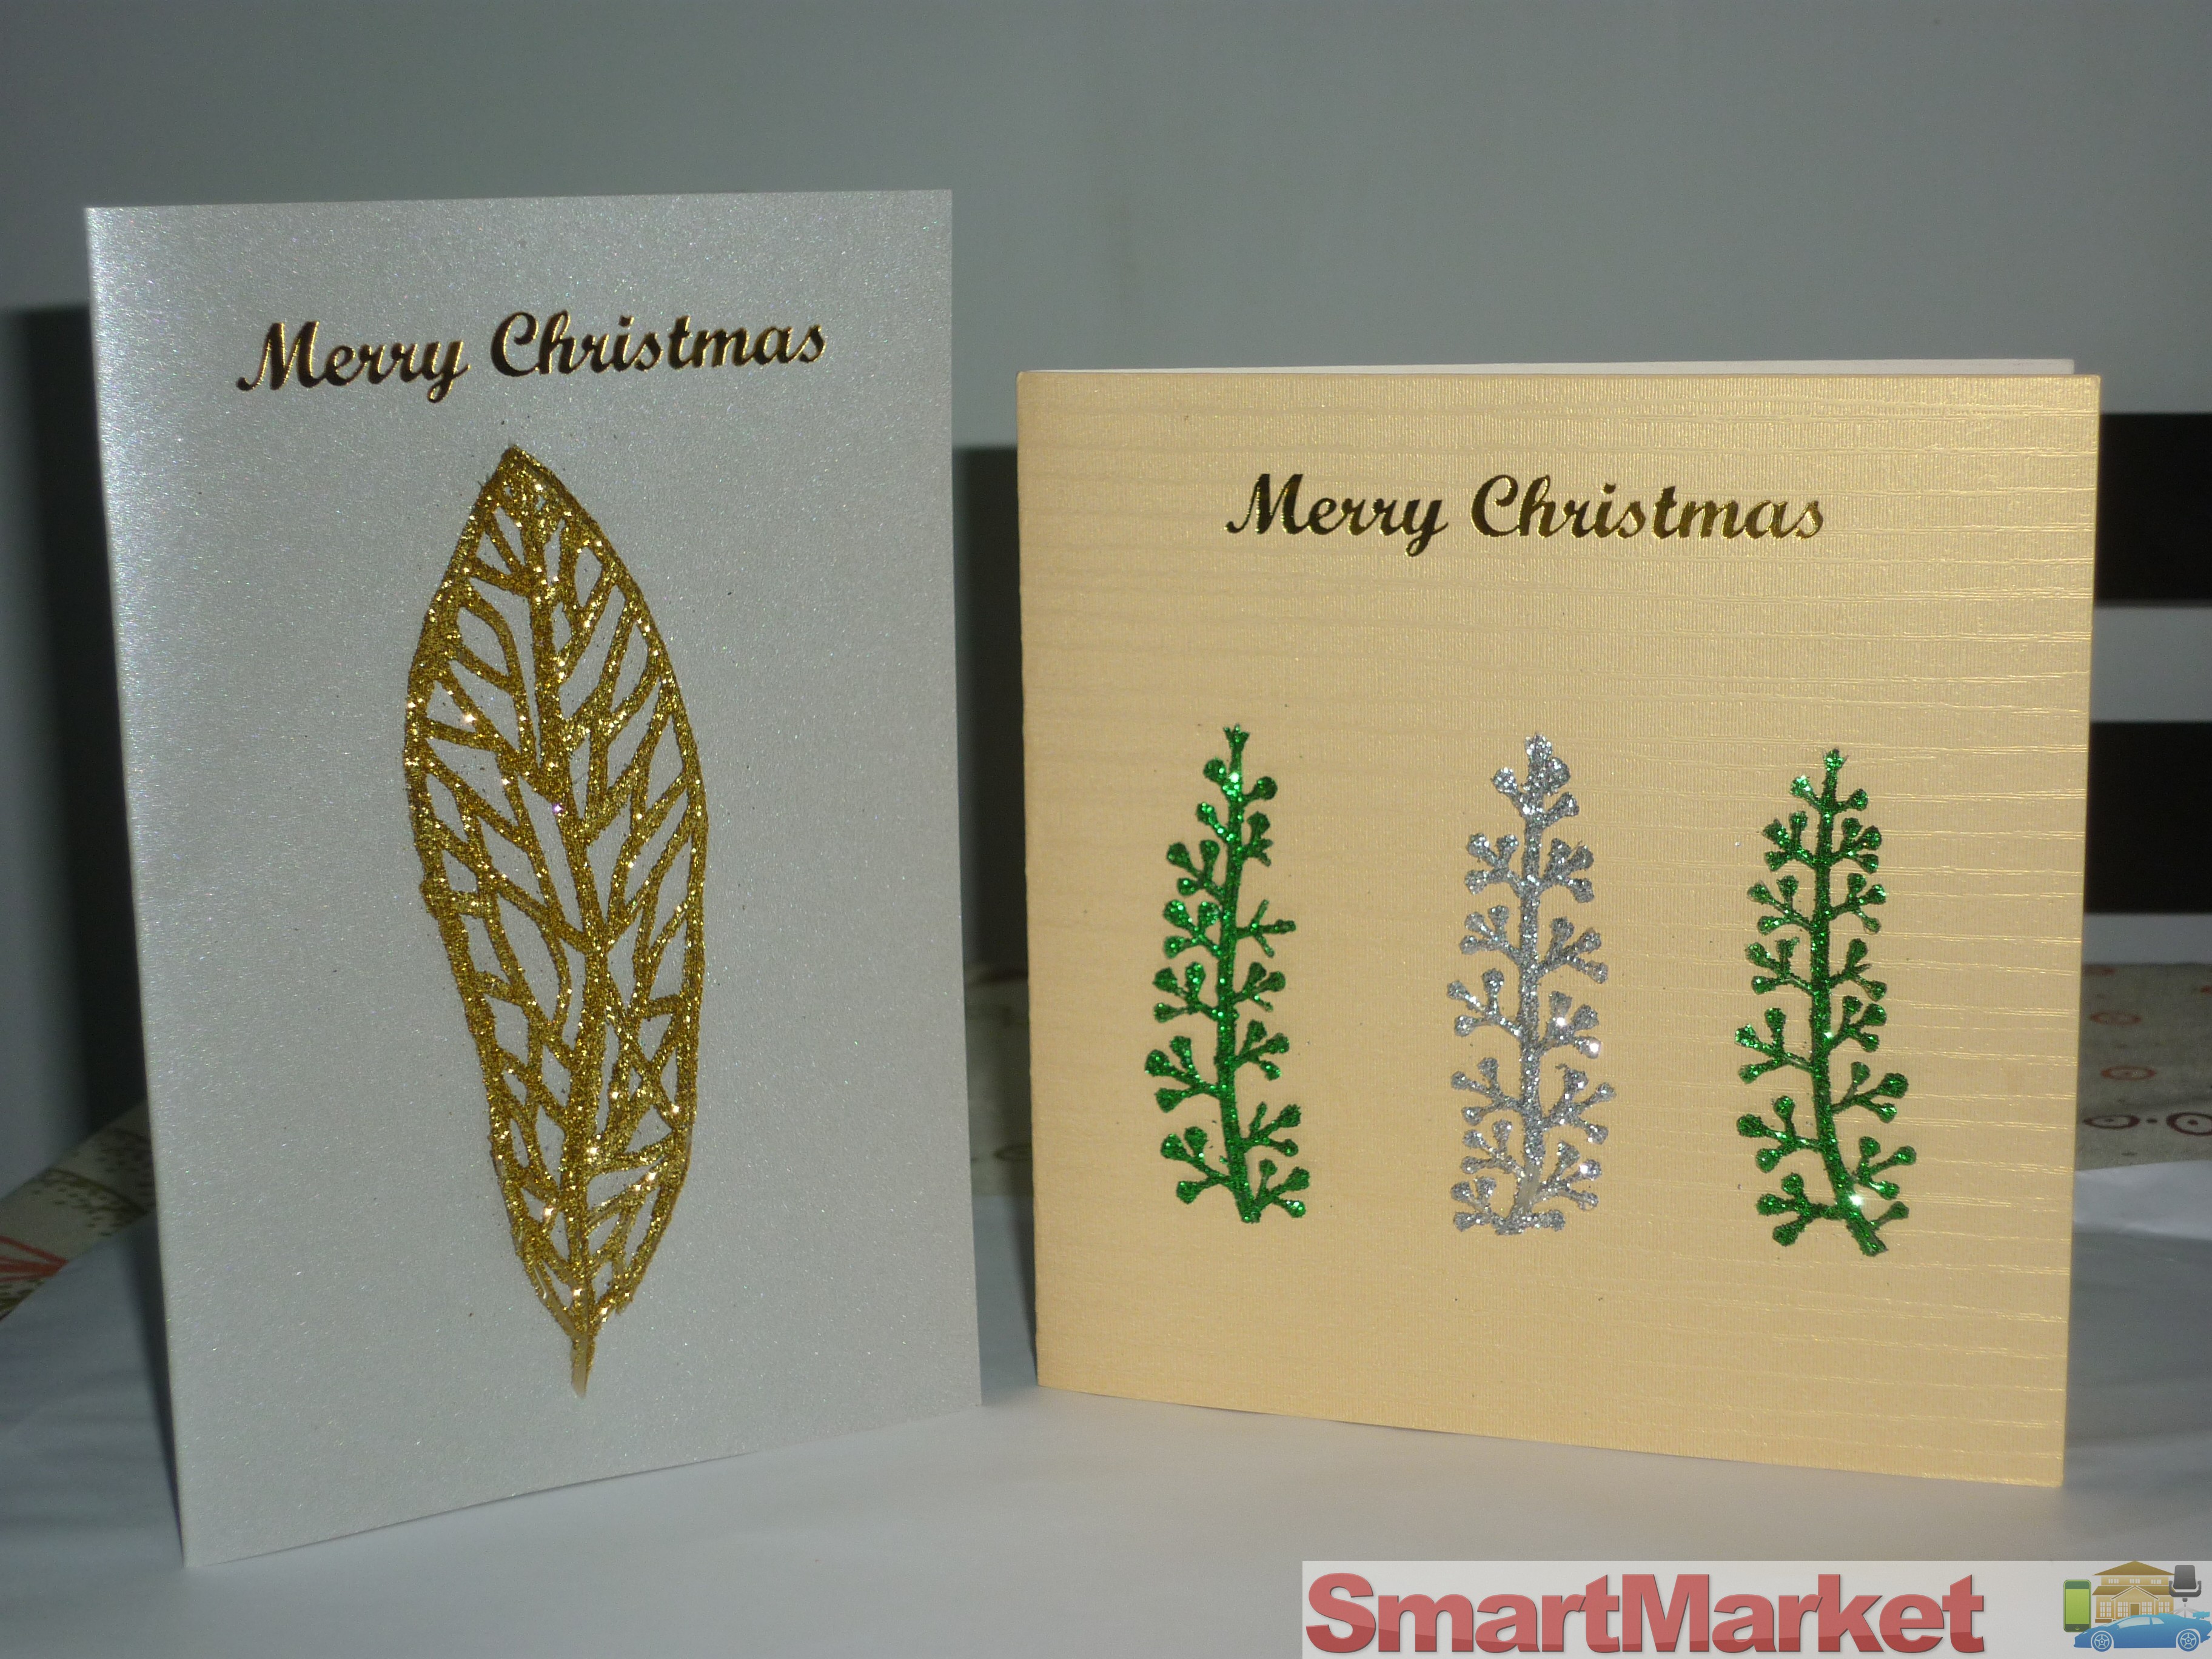 Hand crafted greeting cards